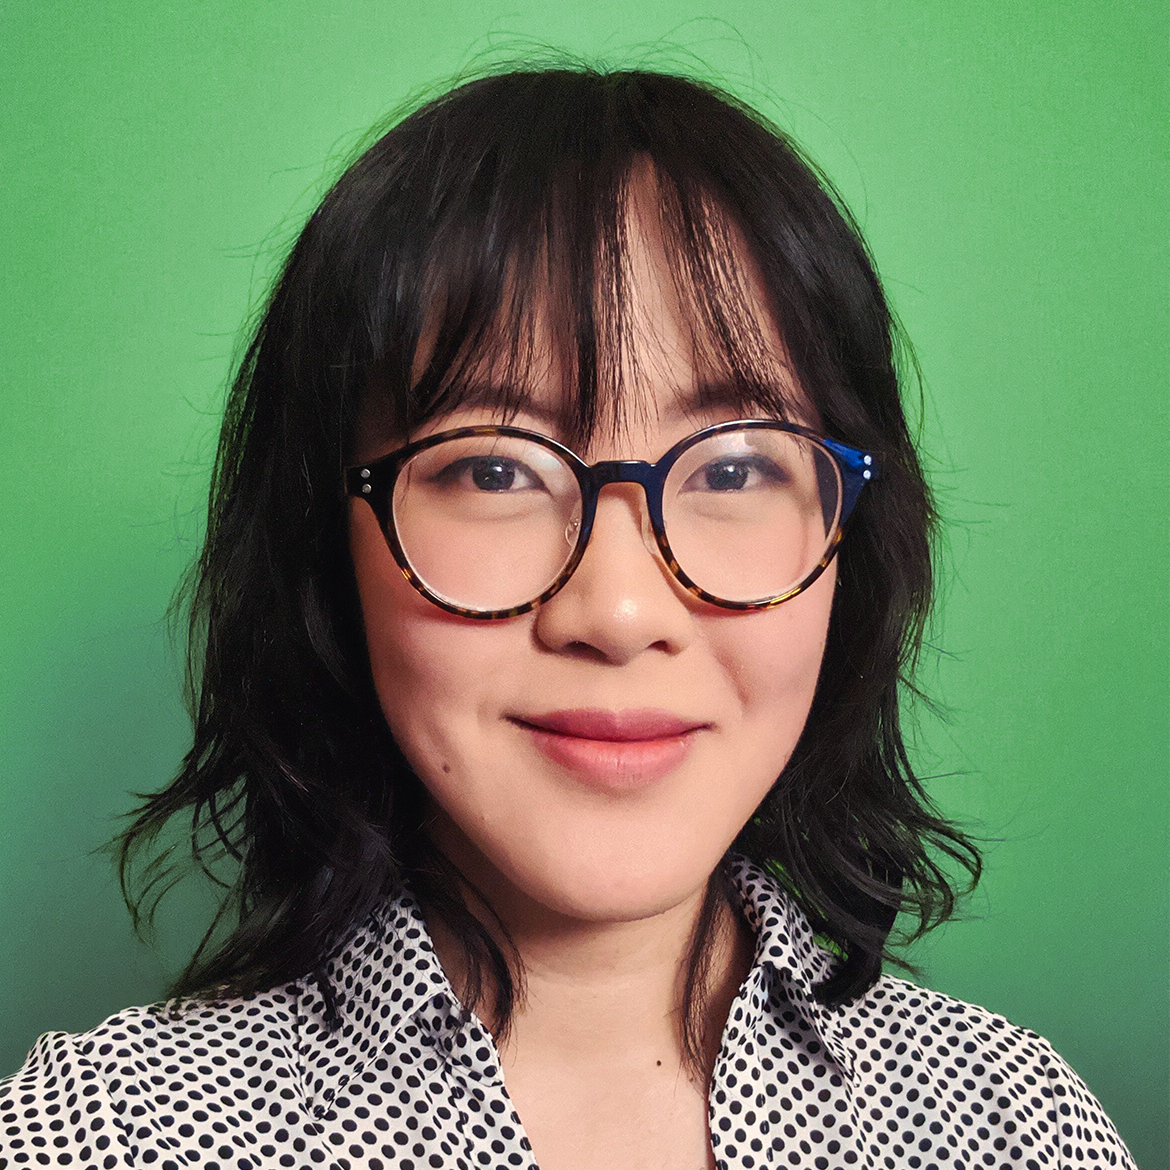 Headshot of Eileen smiling. Girl with black shoulder-length hair and bangs, round glasses, wearing a black and white polka dot shirt, in front of a green background.